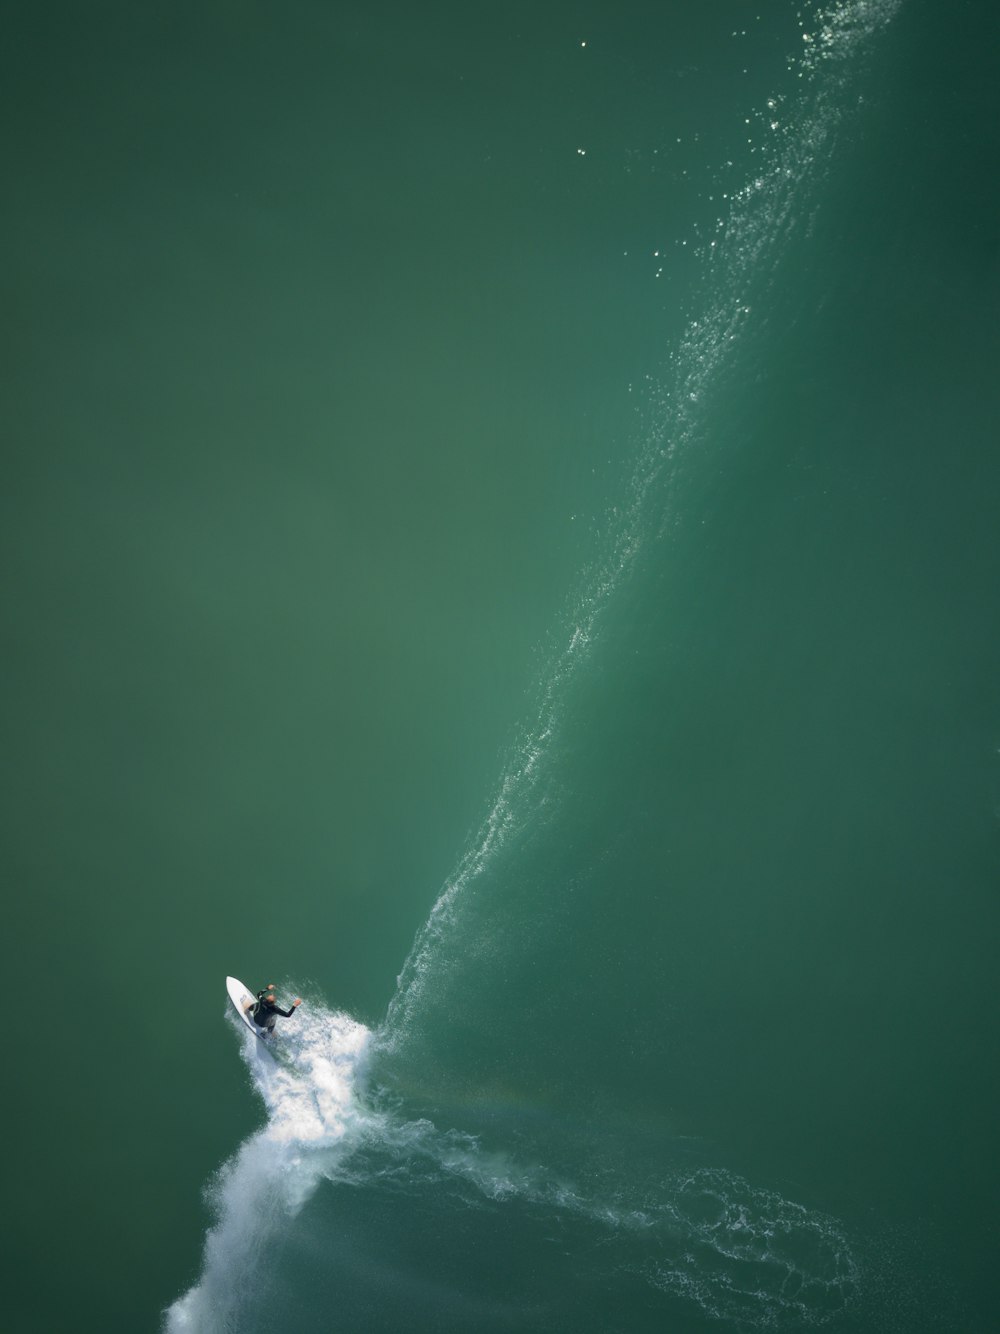 aerial view of surfer